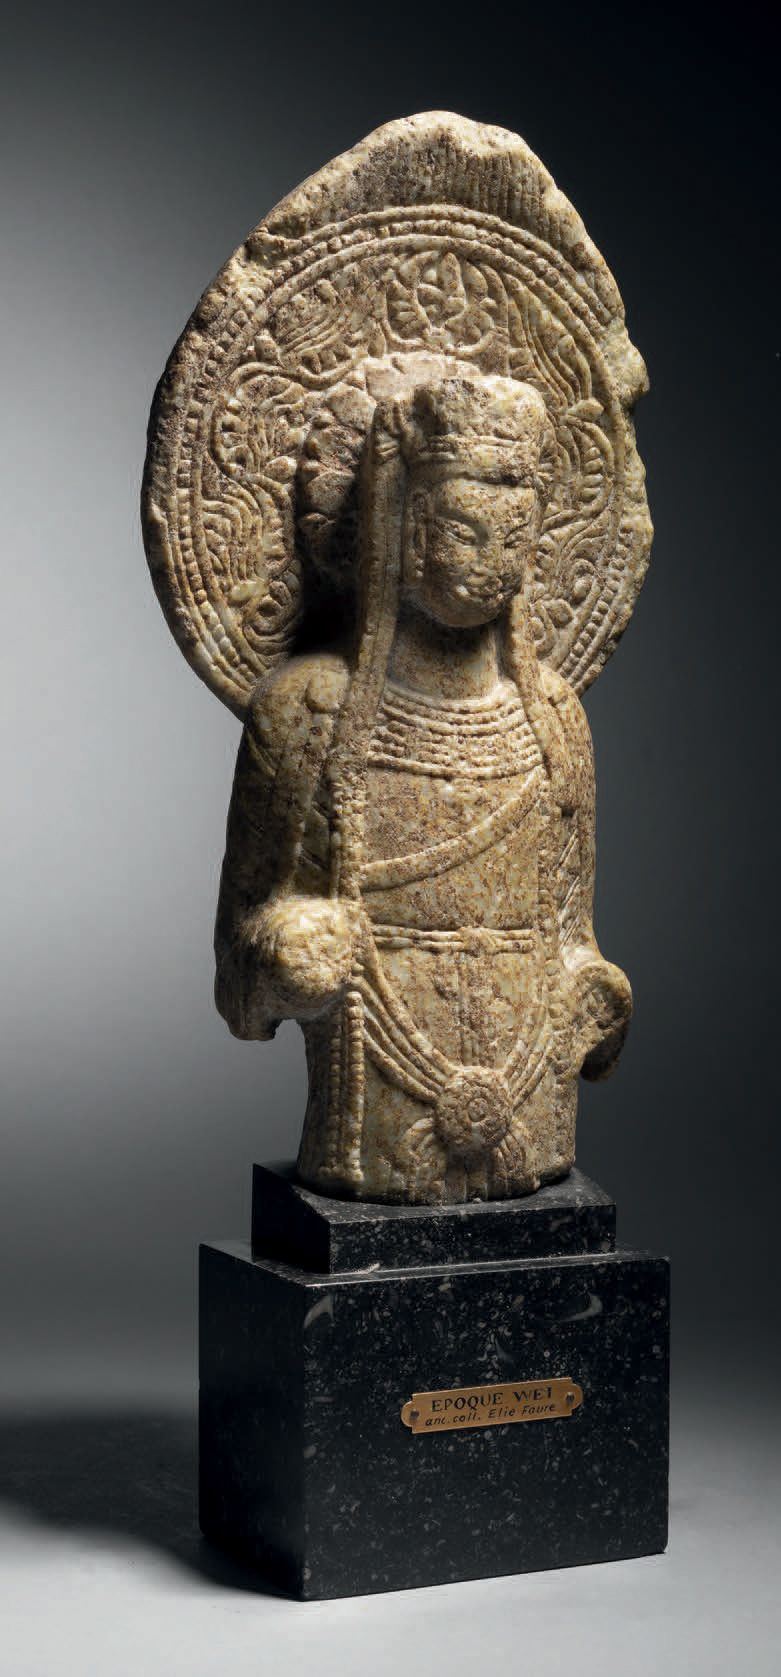 Null Bodhisattva bust, China, Eastern Wei dynasty (534-650)
H. 26.5 cm. Yellow m&hellip;